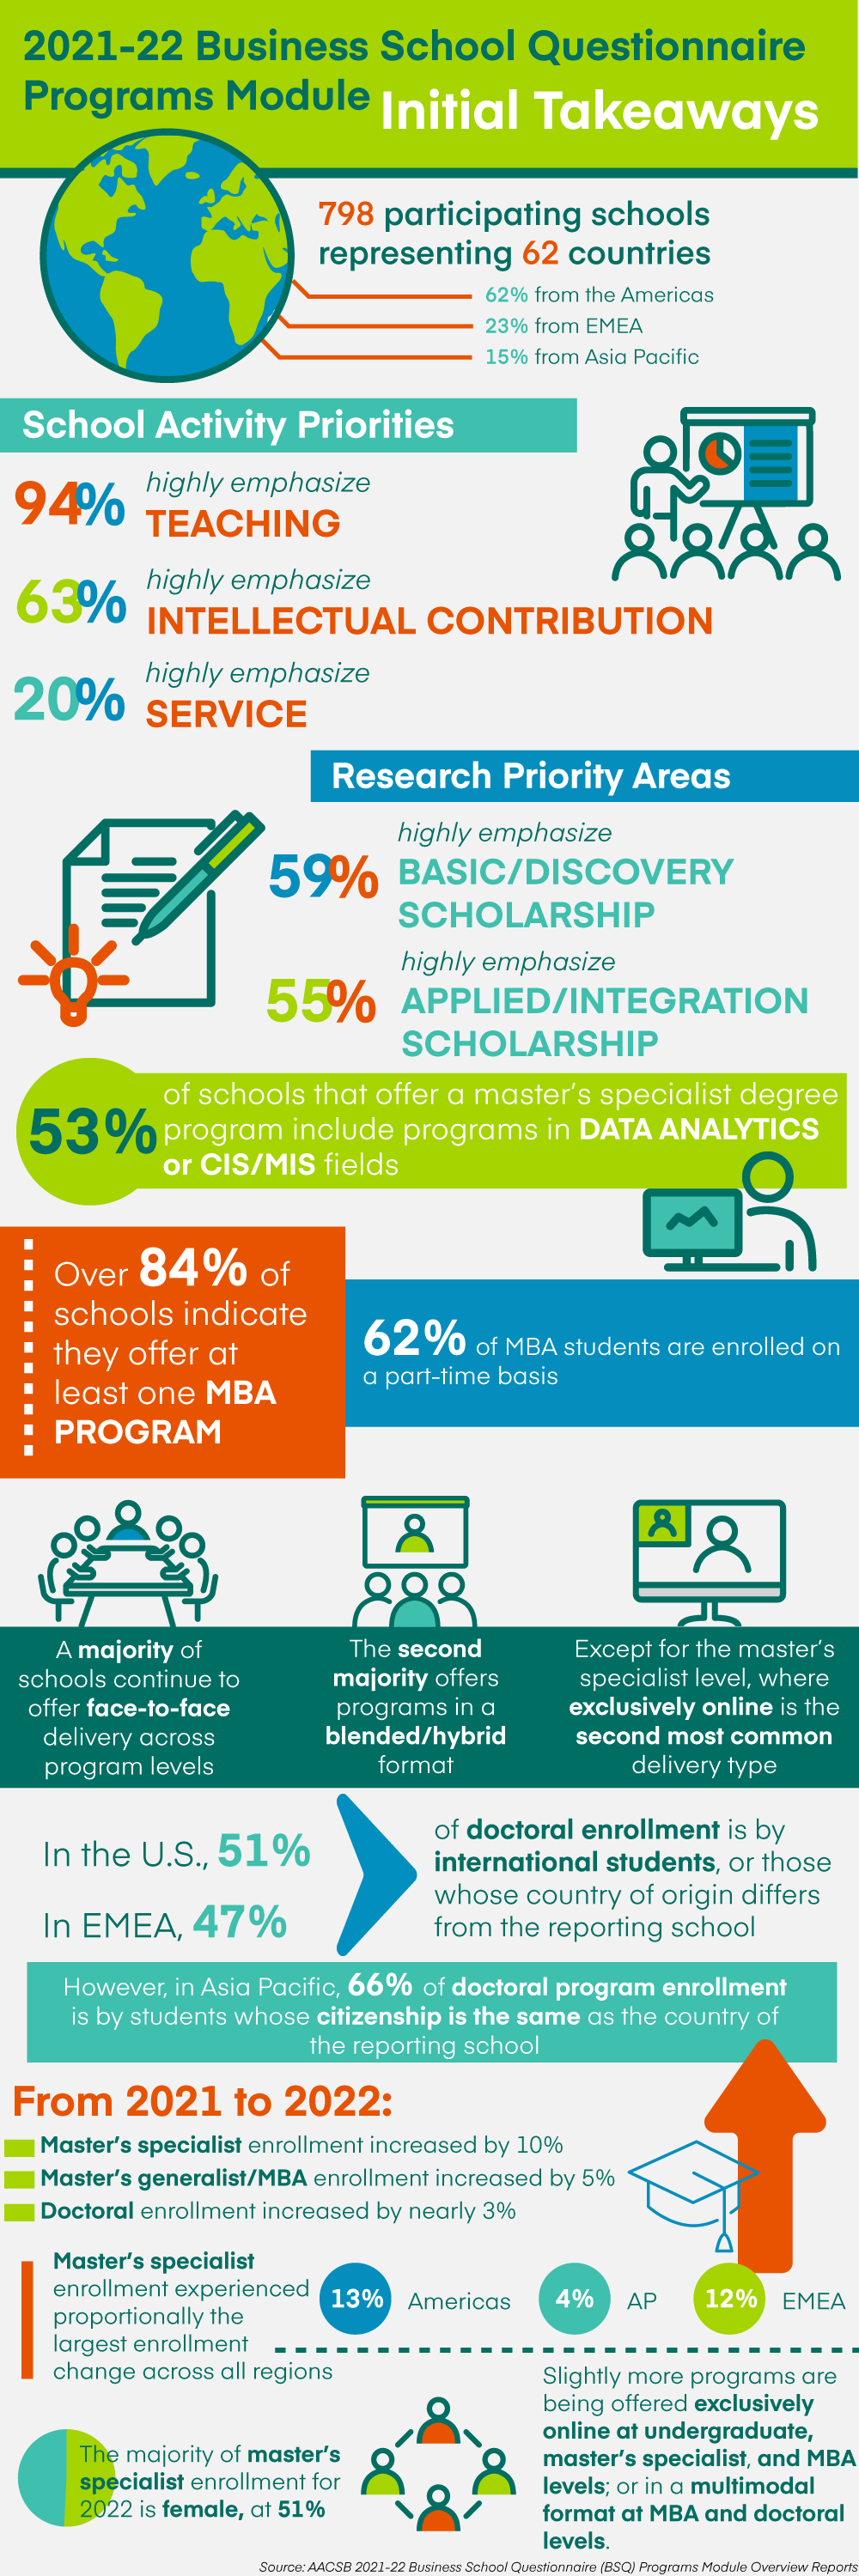 Infographic showing data points from AACSB's Business School Questionnaire Programs Module, 2021-22